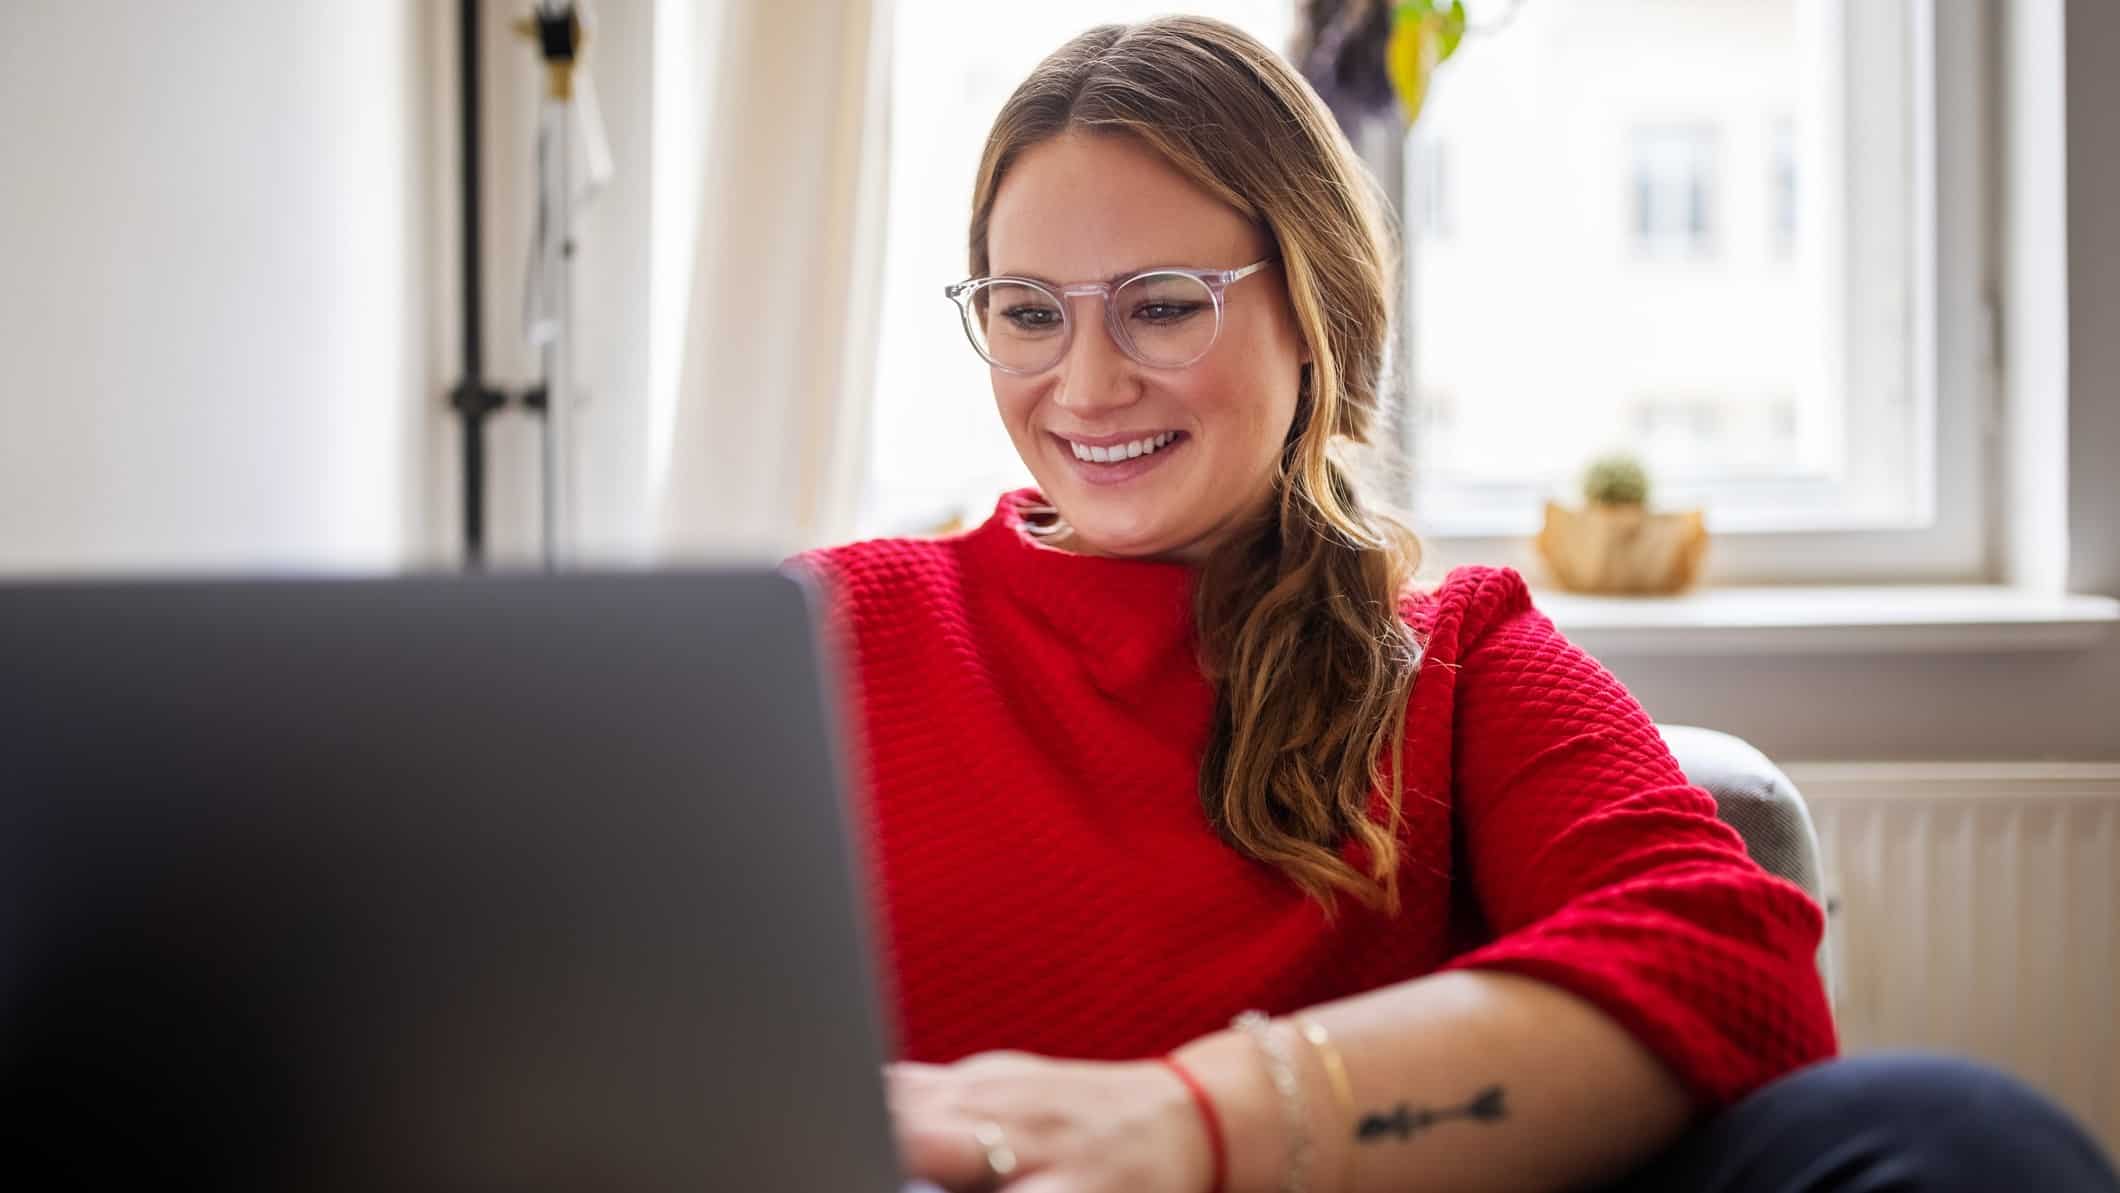 A young woman wearing glasses and a red top looks at her laptop happily, watching, waiting, on good results.